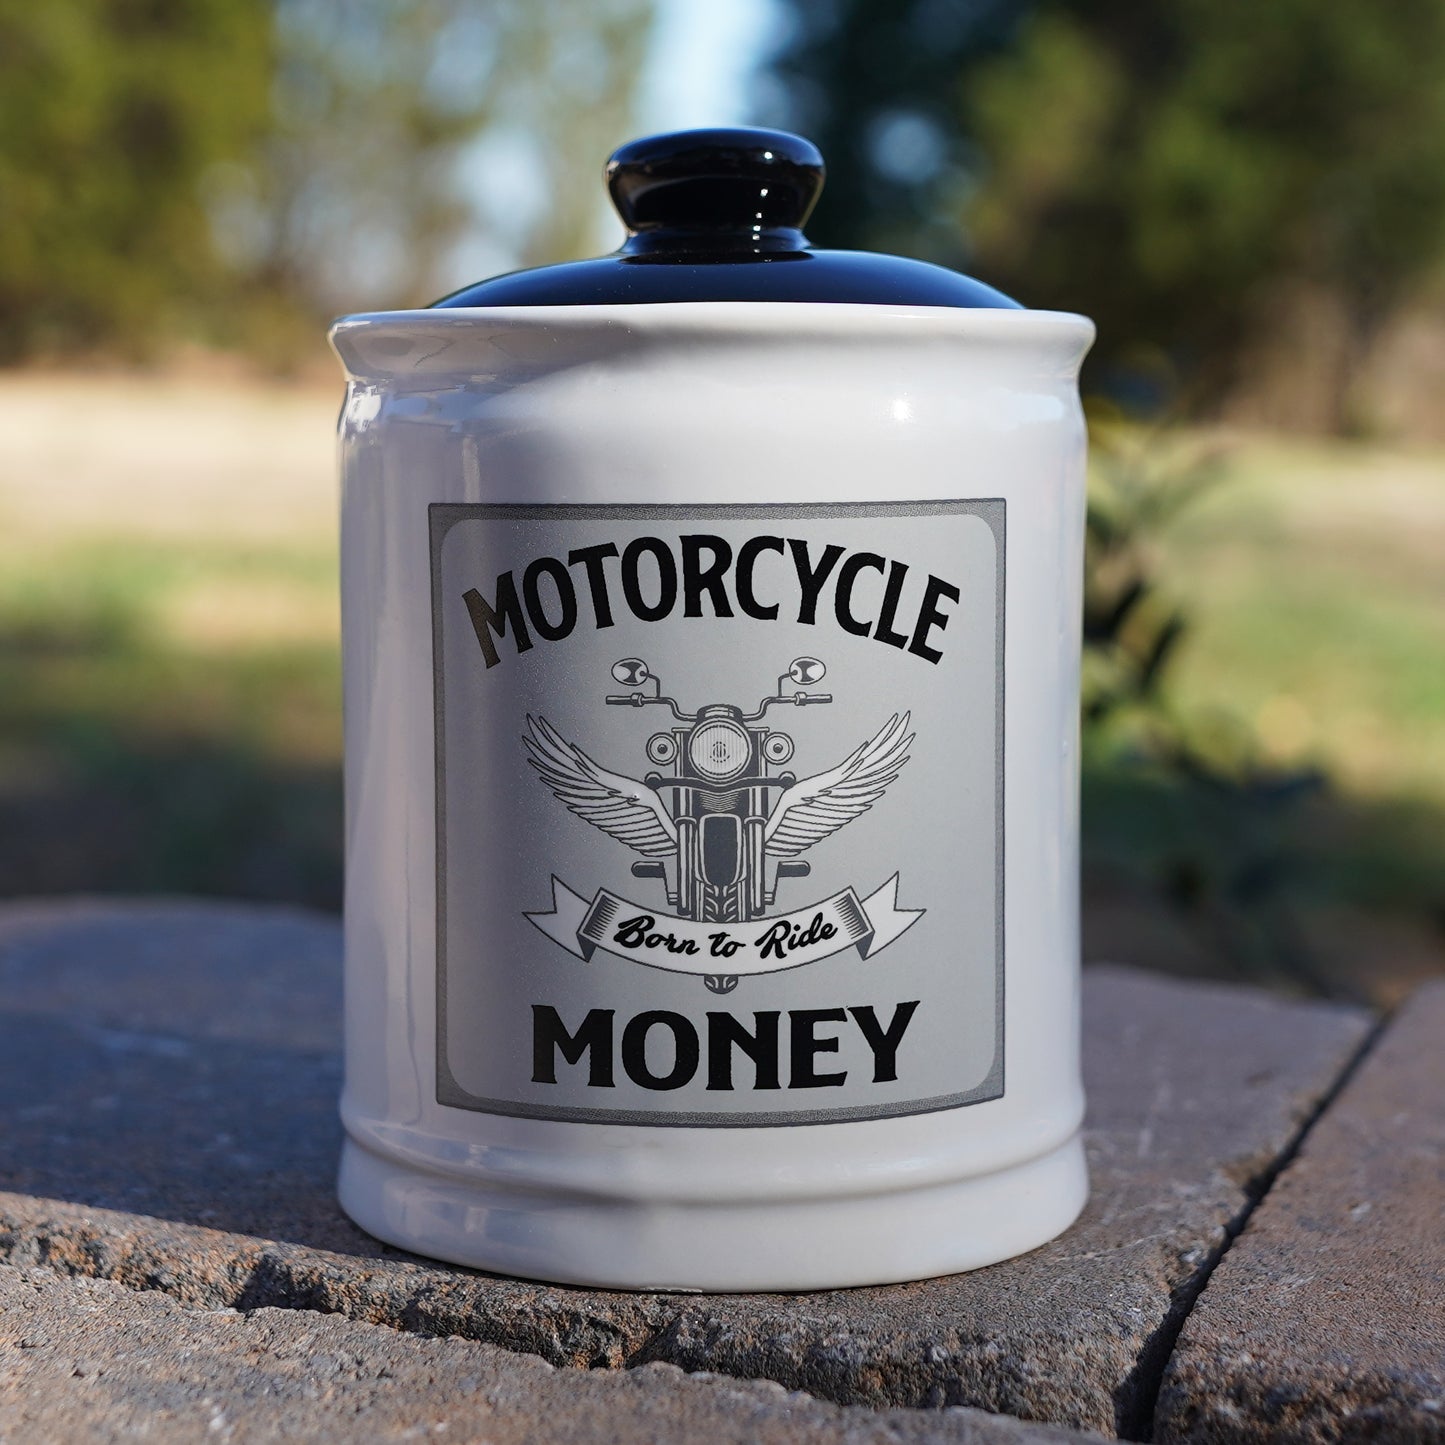 Cottage Creek Motorcycle Money Piggy Bank, Multicolored, Ceramic, 6" Motorcycle Candy Jar, Biker Gifts